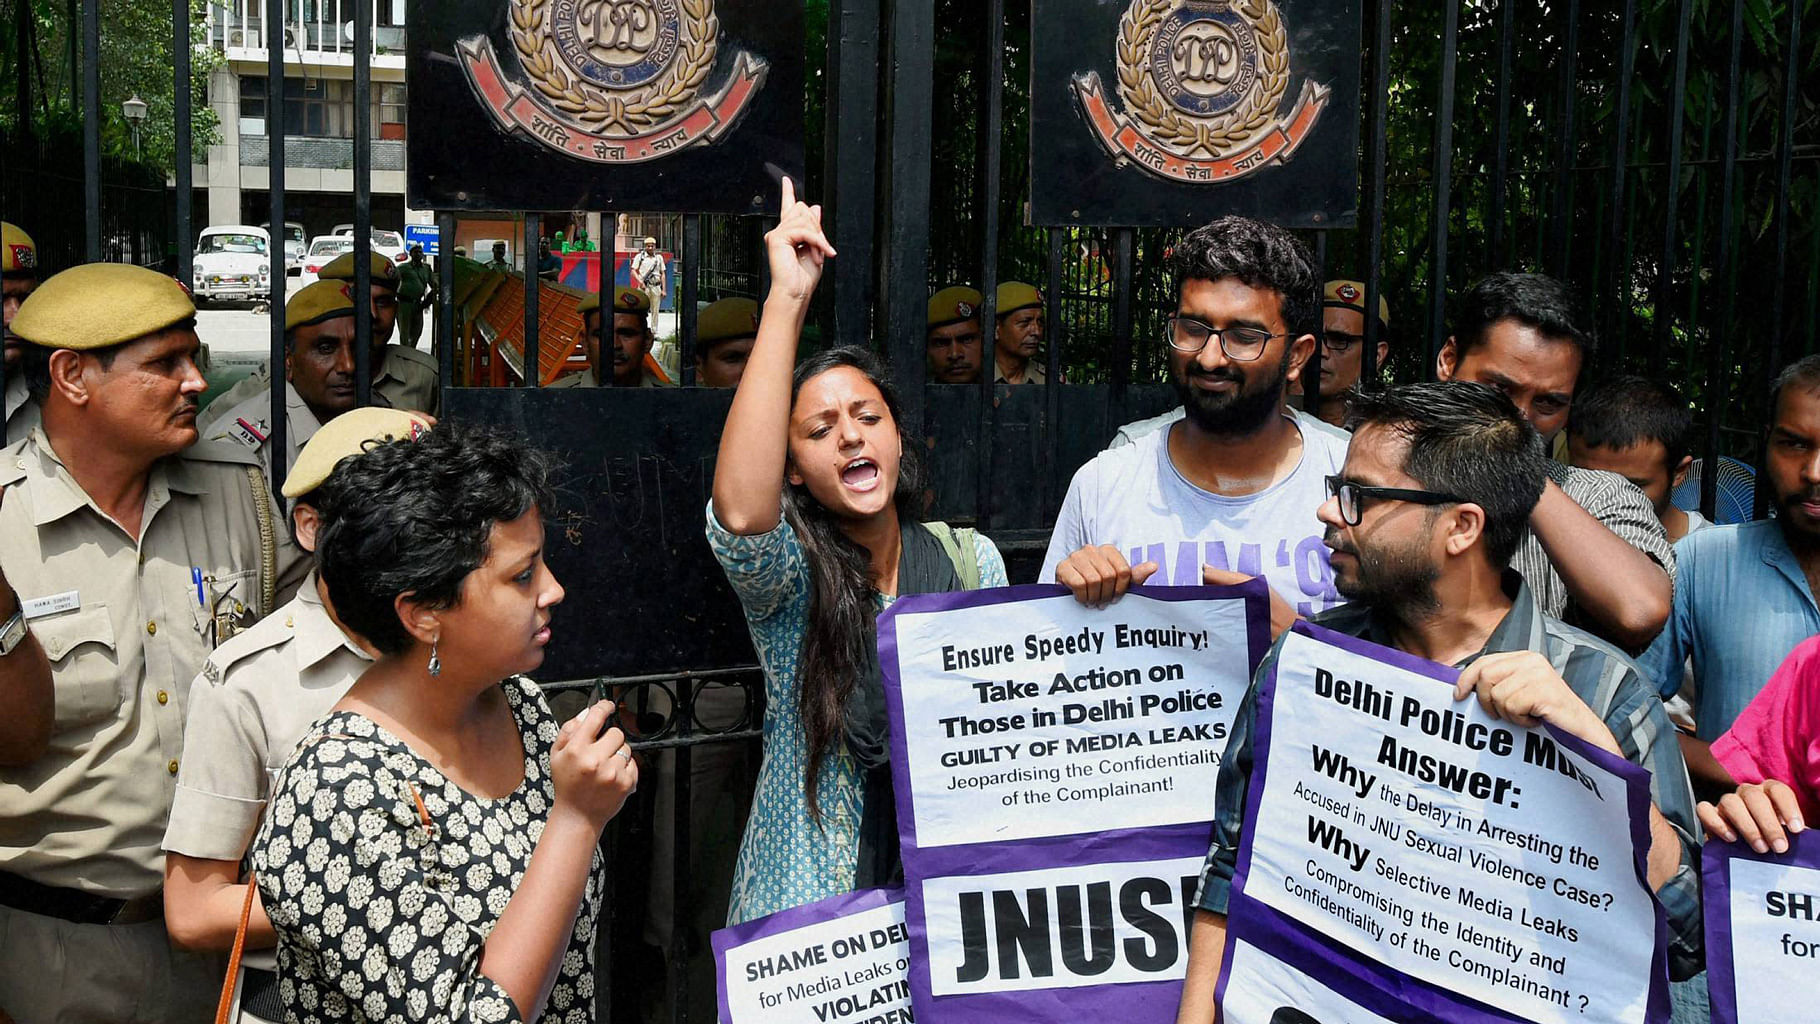  Members of AISA and JNUSU shout slogans during their protest in connection of JNU rape case at Police Headquarters in New Delhi on Thursday. (Photo: PTI)